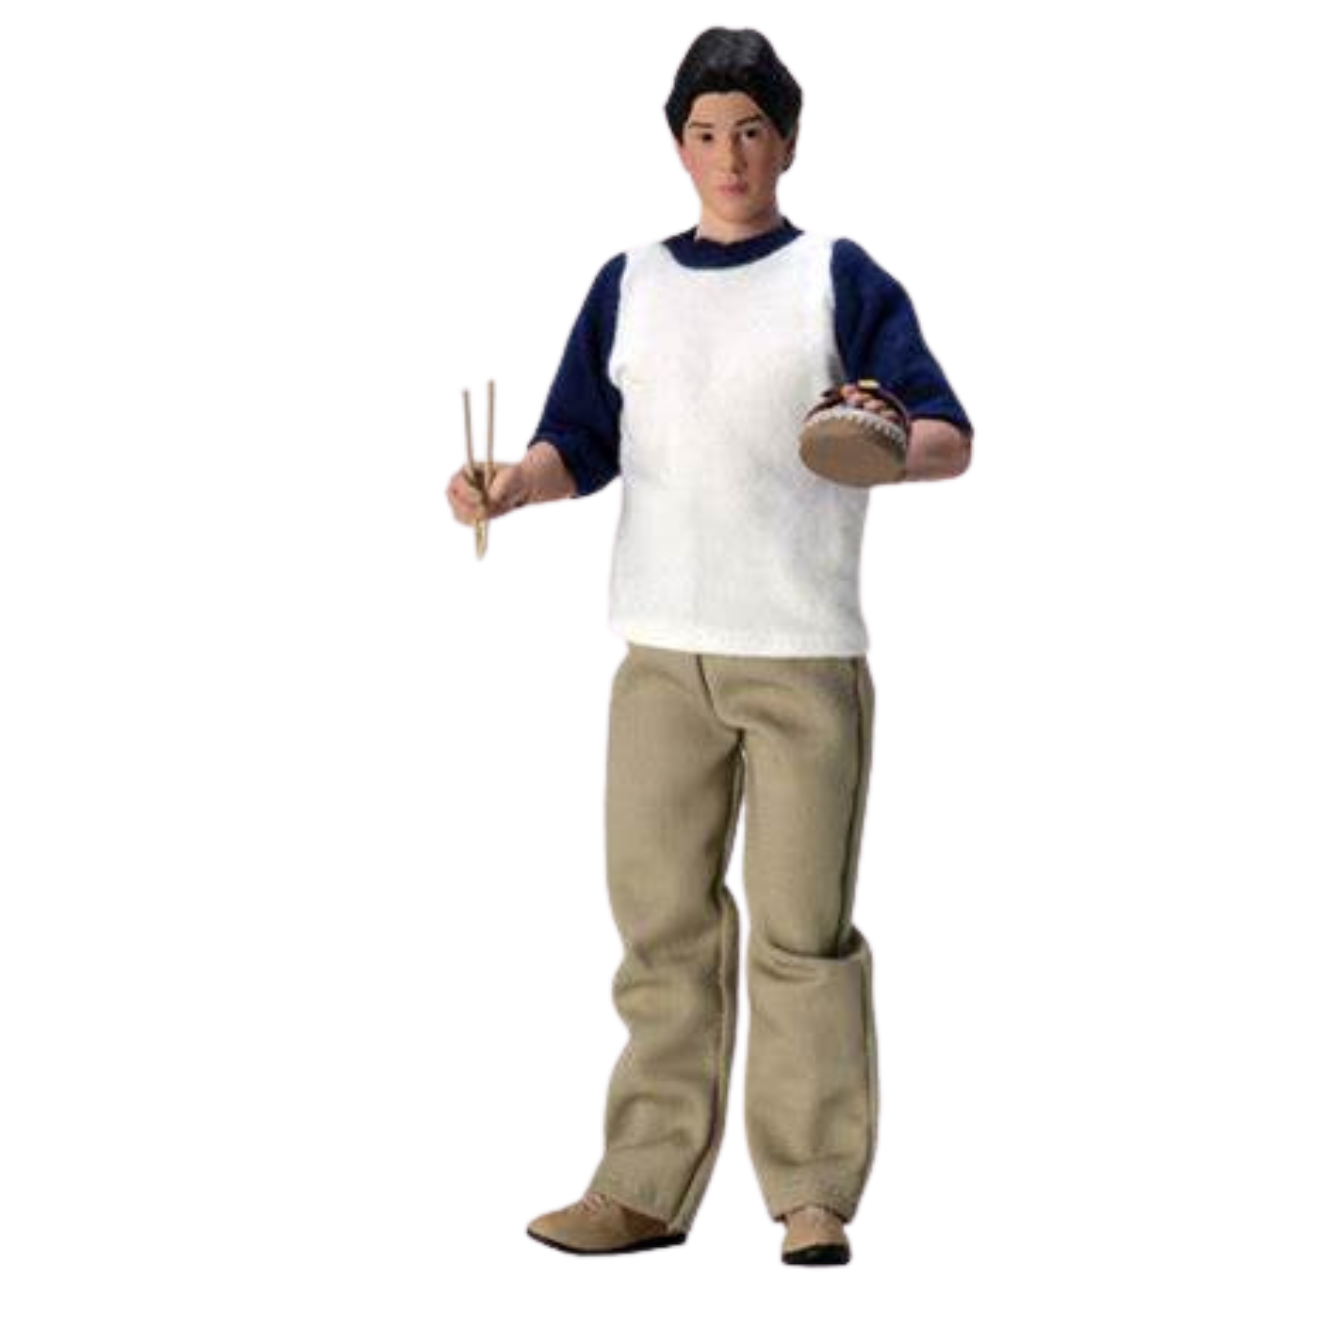 The Karate Kid 8" Clothed Action Figure: Daniel